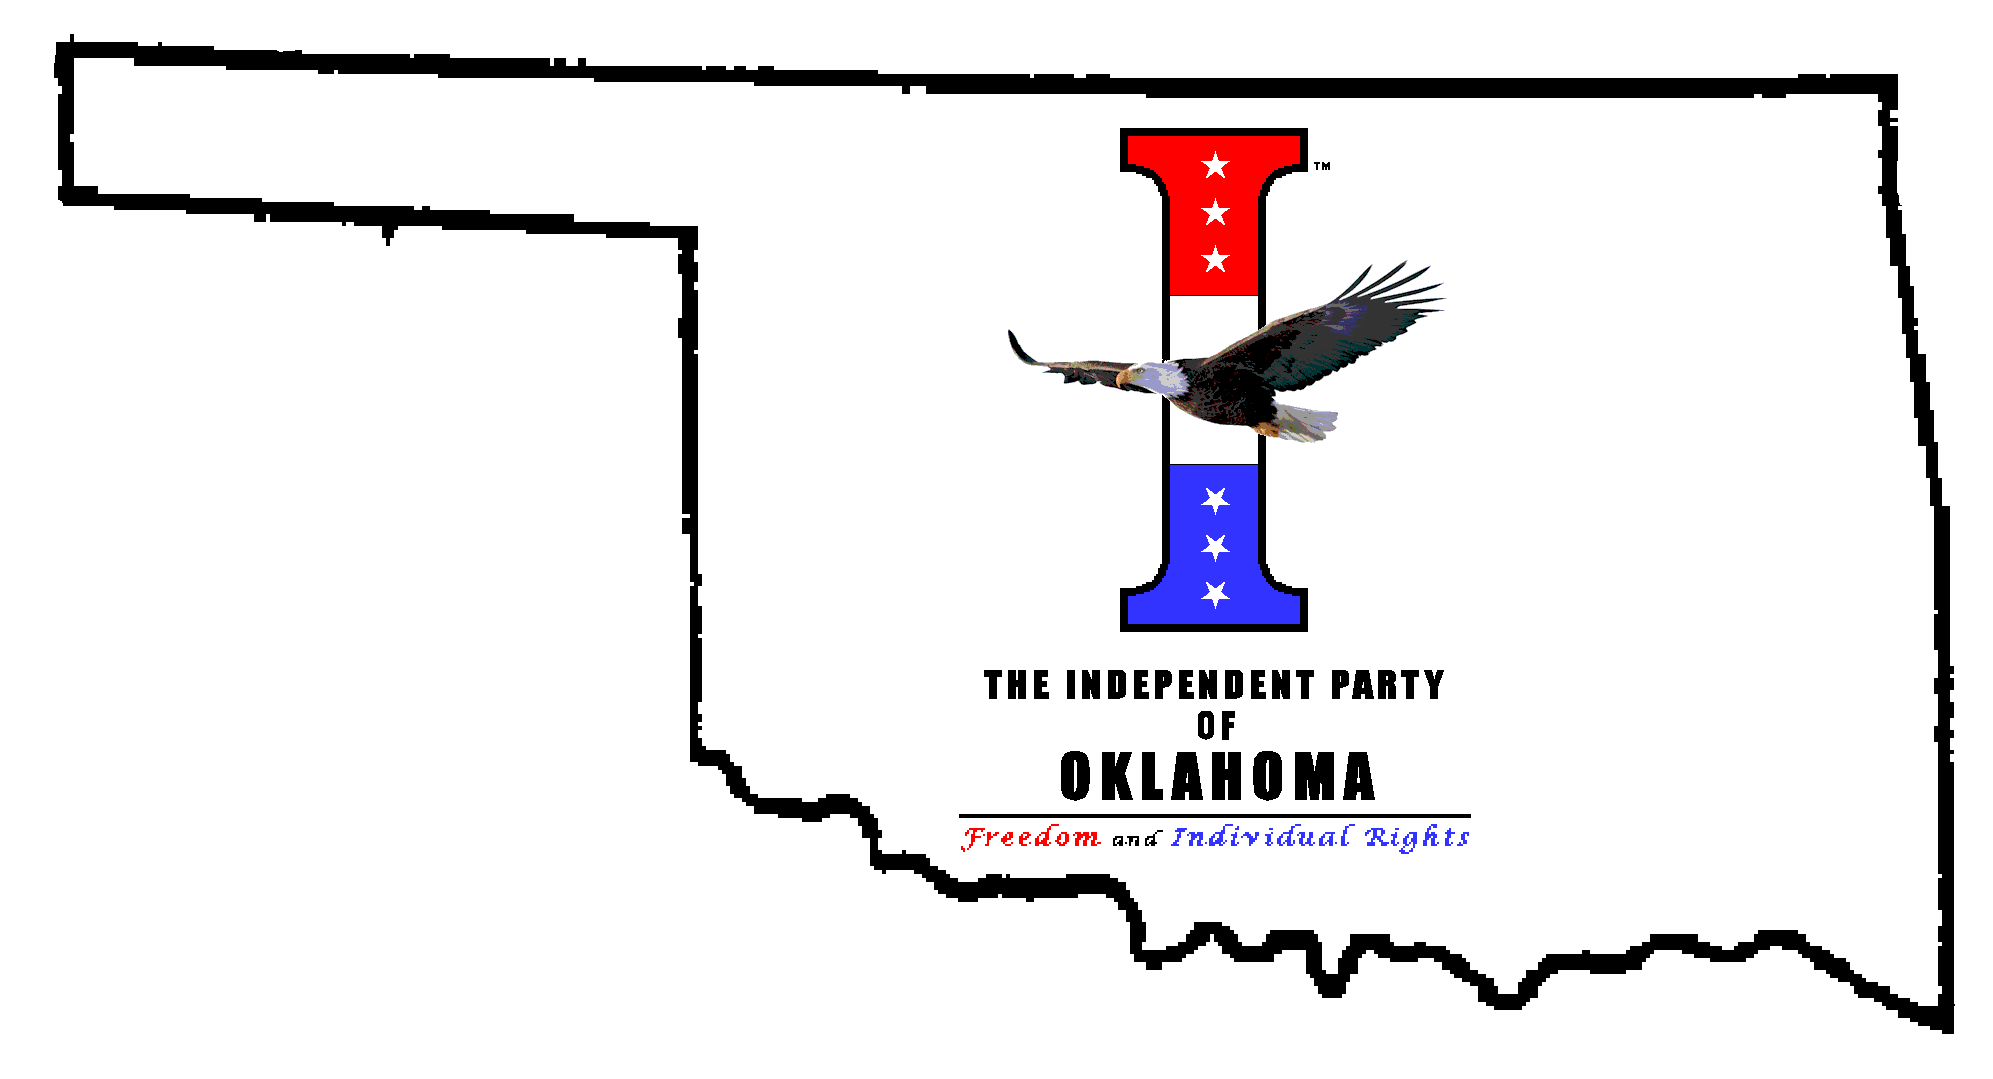 The Independent Party of Oklahoma!